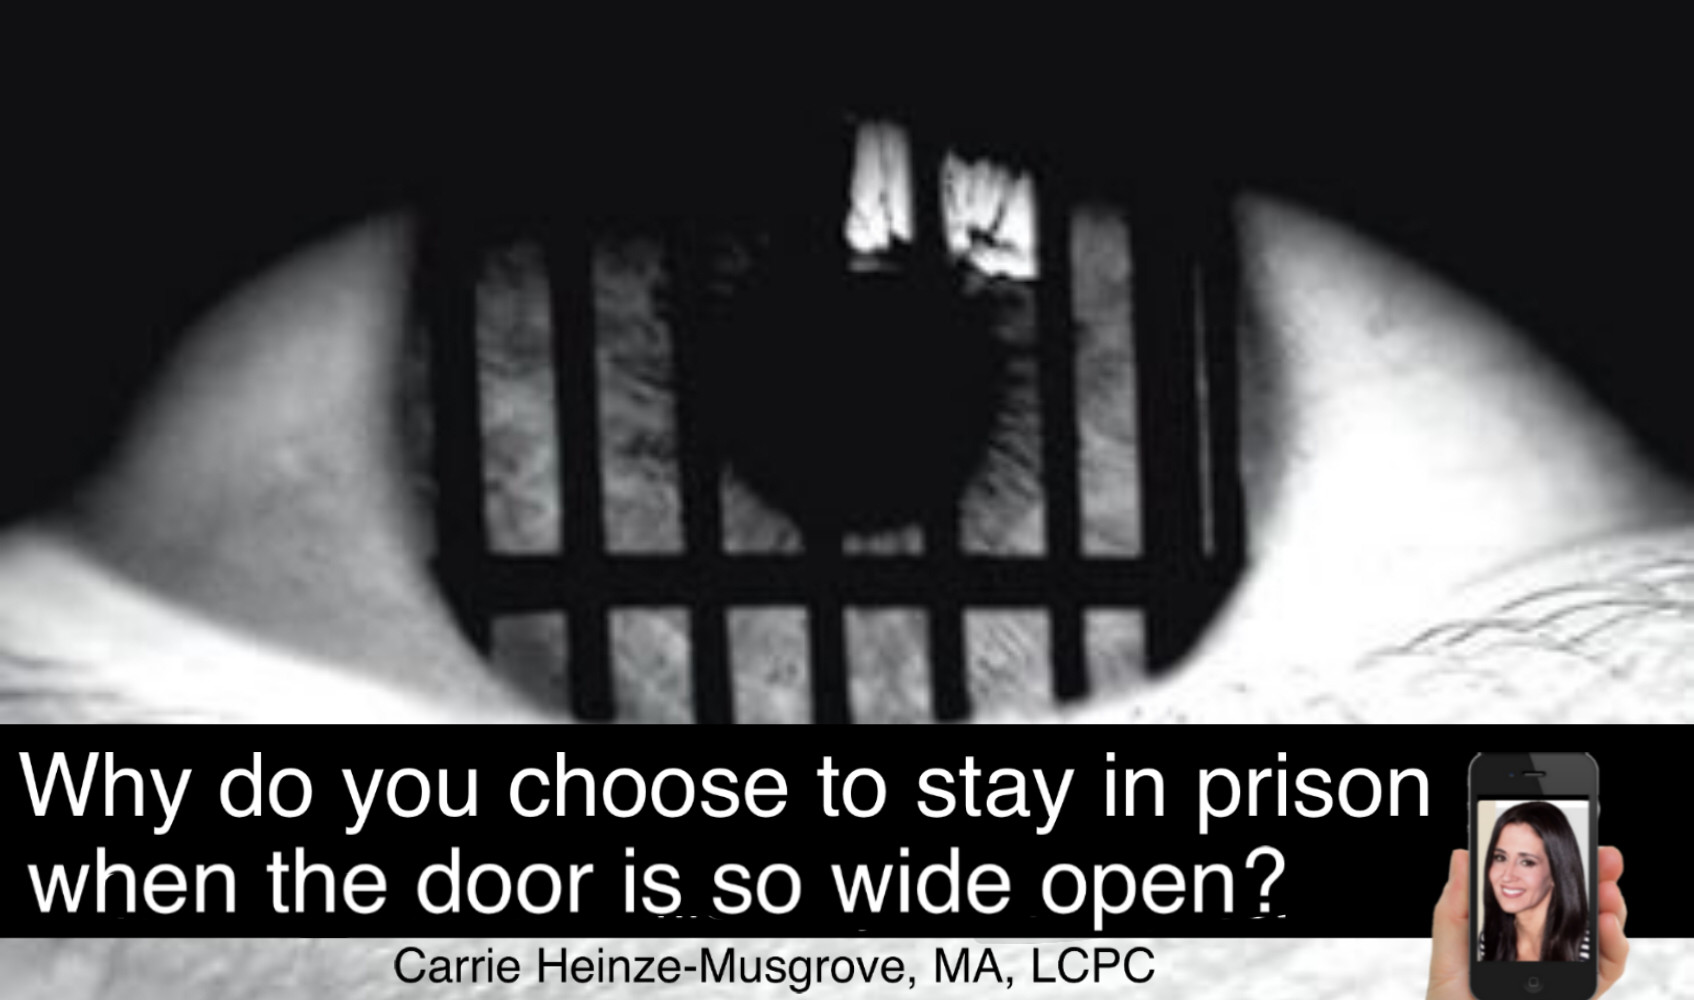 Why do you stay in prison?